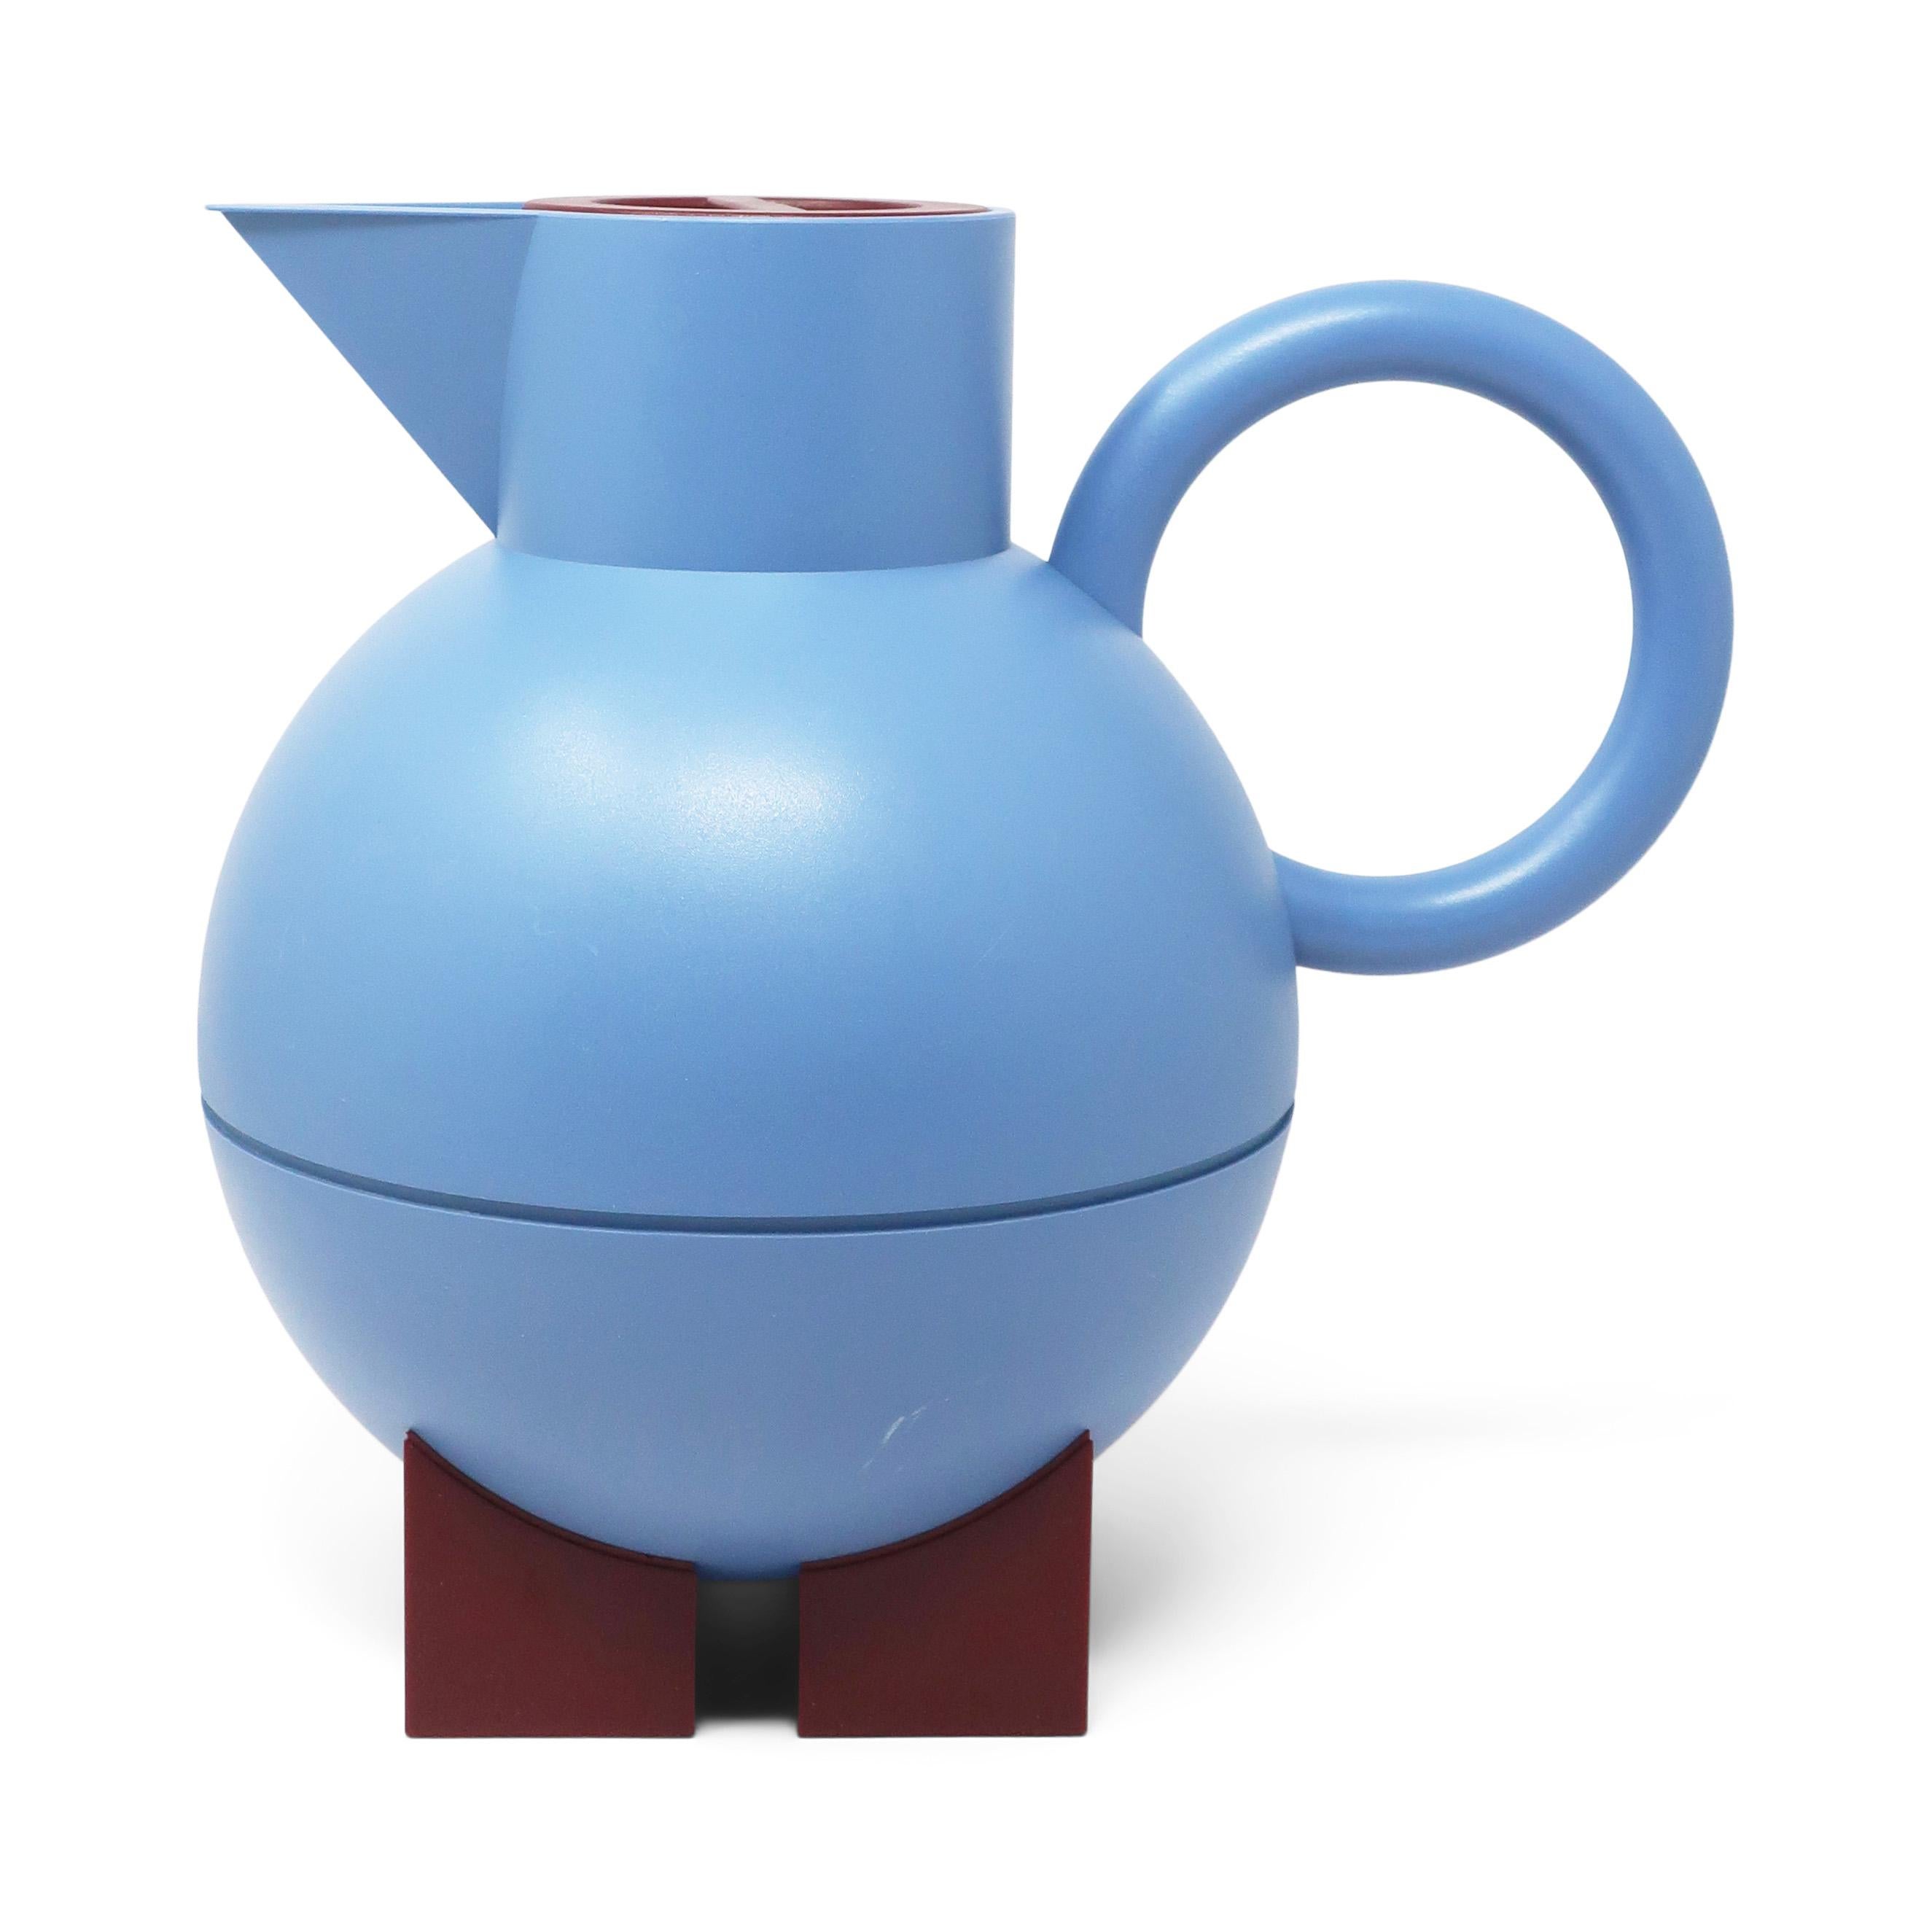 A classic design by Memphis Milano-affiliated American postmodern designer and architect Michael Graves for his Euclid line for Alessi, the Italian home goods powerhouse. A red handle, triangular spout, and rounded body sitting on blue rectangular